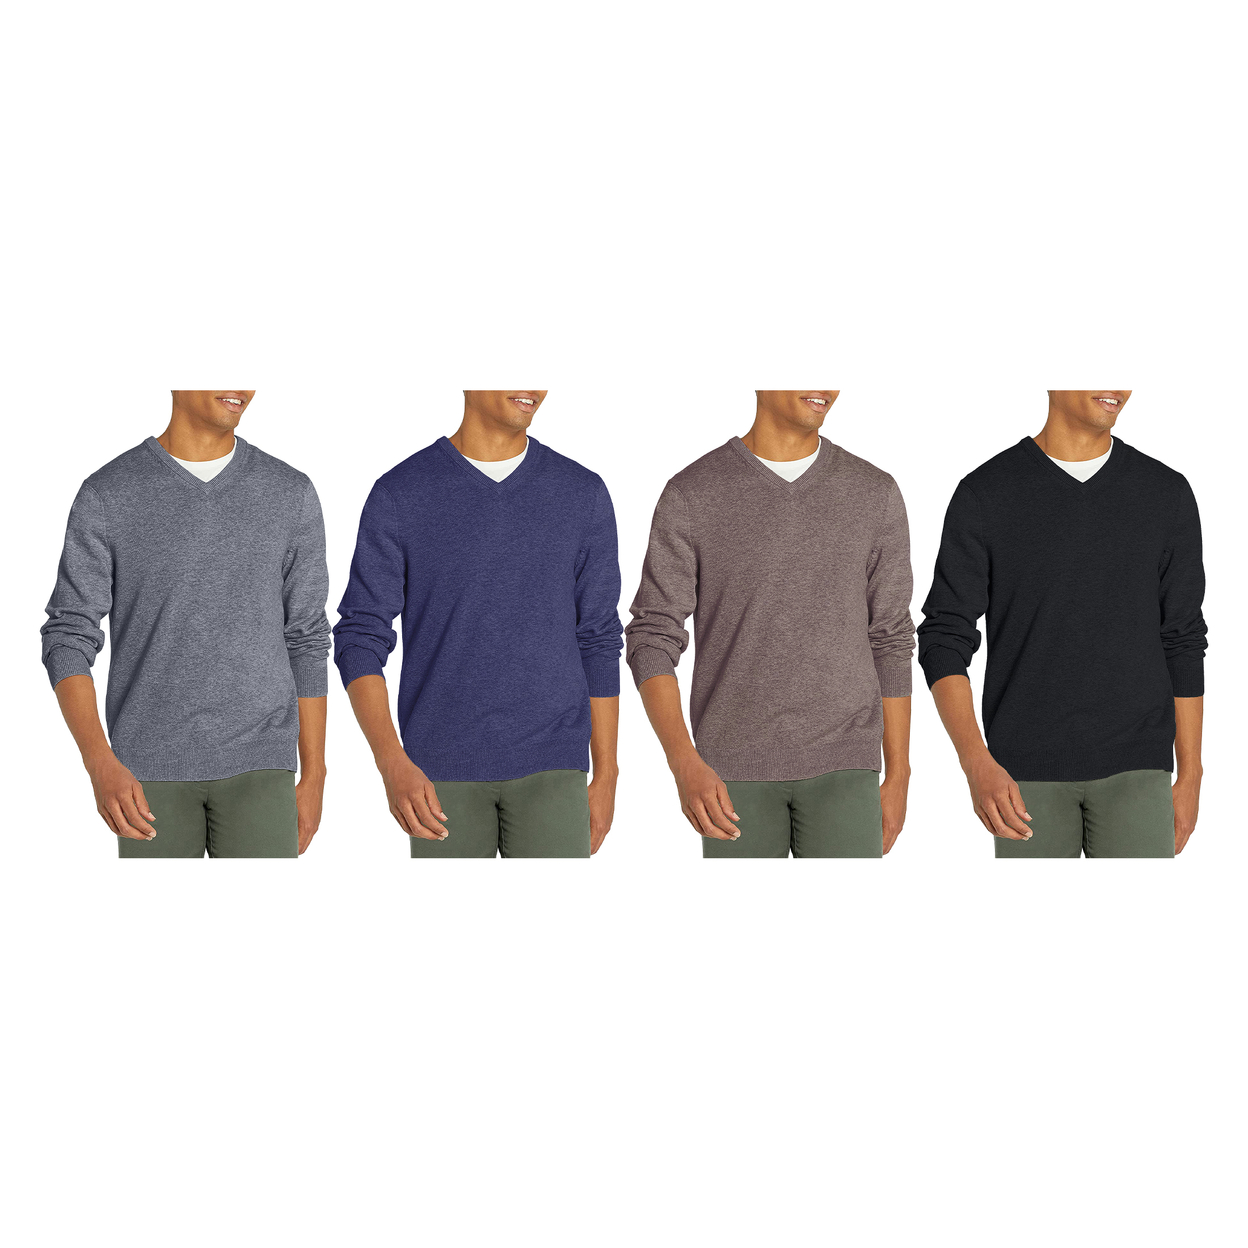 Multi-Pack: Men's Casual Ultra Soft Slim Fit Warm Knit V-Neck Sweater - 1-pack, X-large